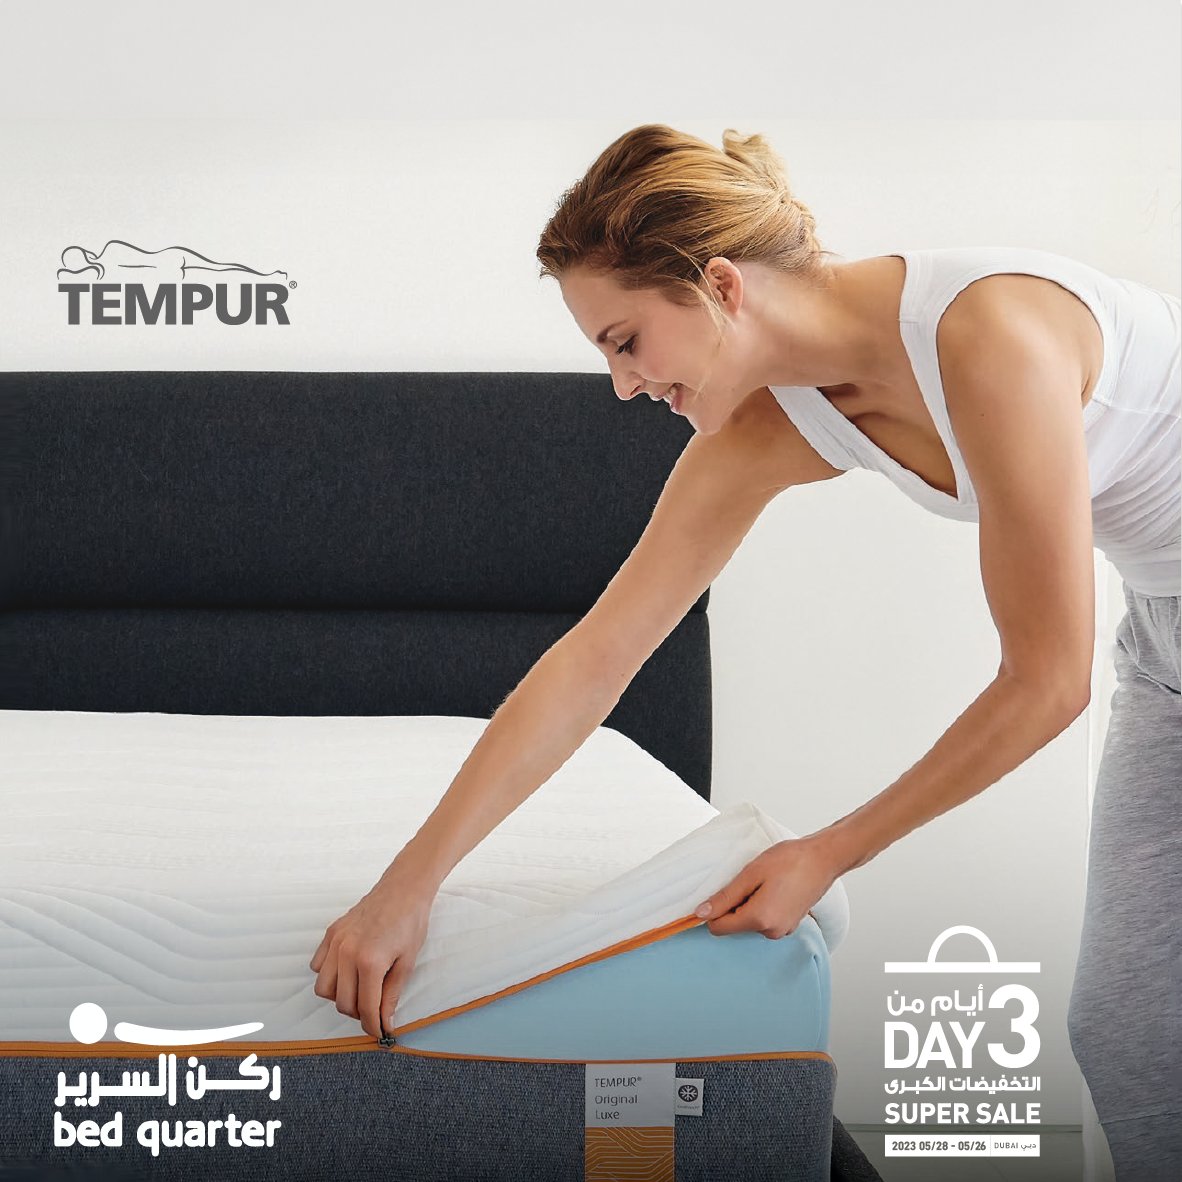 🔥 Dubai Super Sale is on! Visit BedQuarter & TEMPUR stores. 🌙 From May 26-28, it's Buy One, Get One FREE on mattresses, recliners, massage chairs, & accessories! 😱💥 Don't miss out! 💤✨ #DubaiSuperSale #BuyOneGetOneFree #BedQuarter #TEMPUR